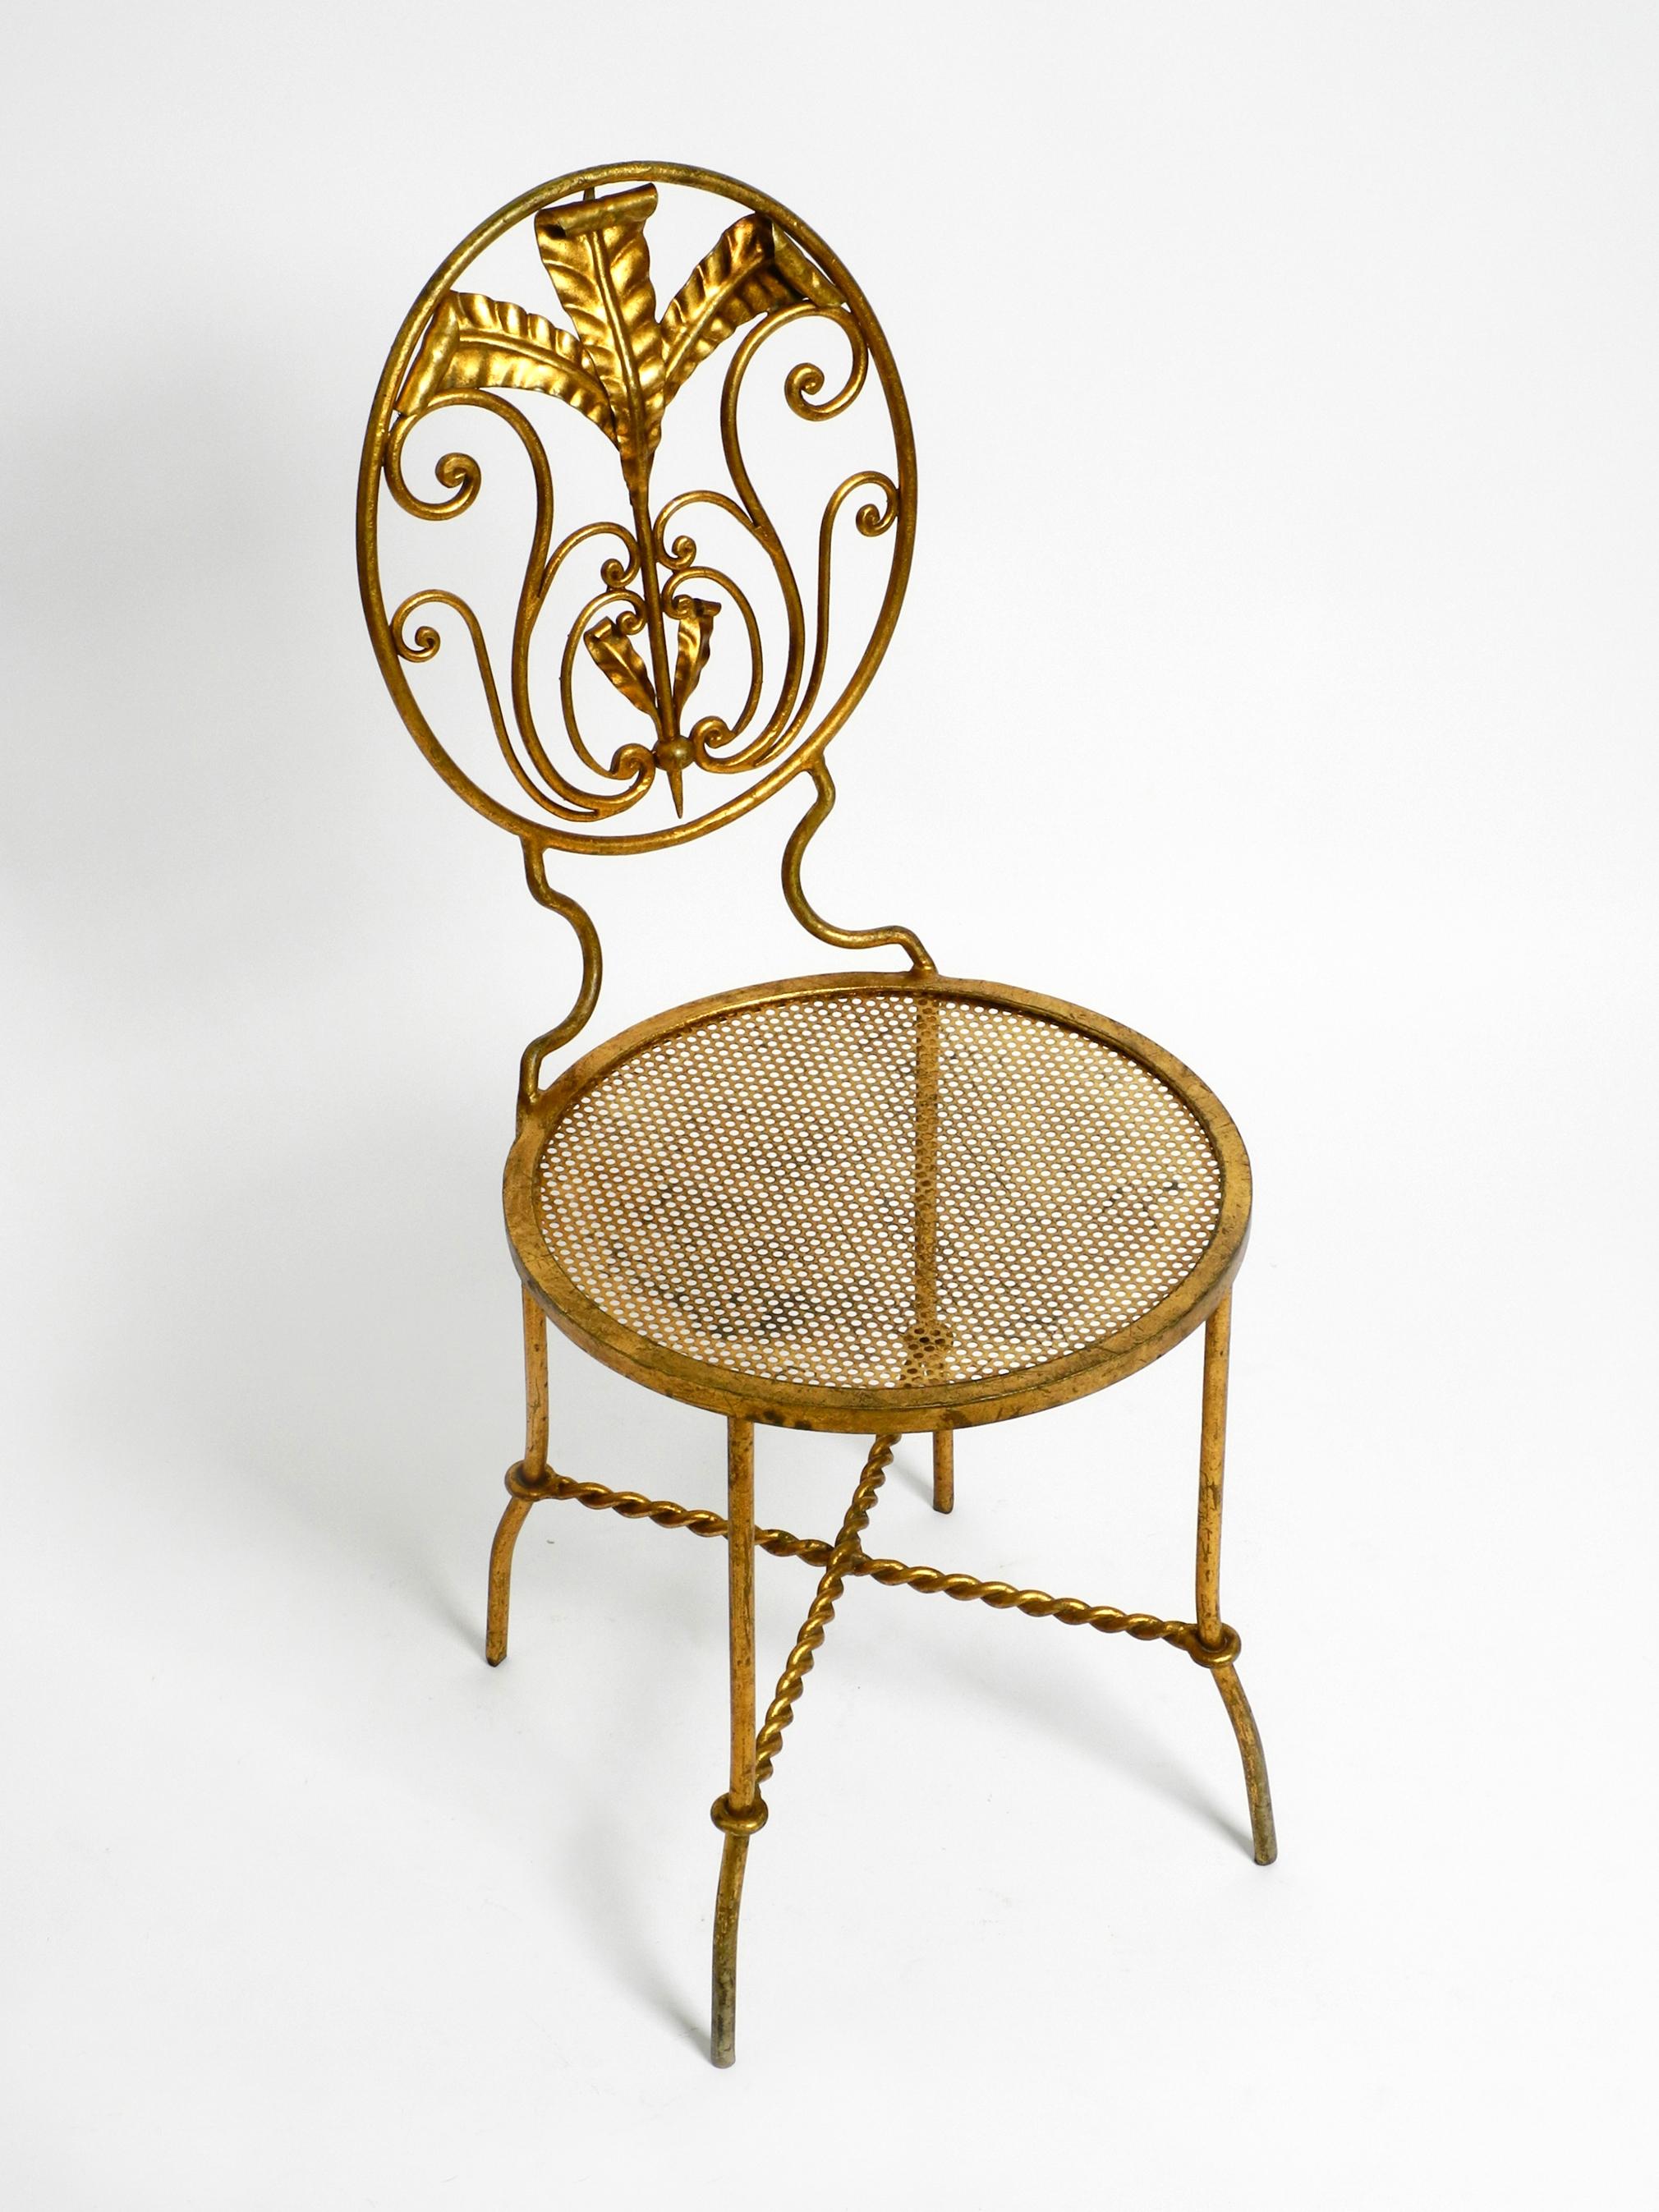 Beautiful Italian 70's Regency Design Gold Plated Wrought Iron Chair For Sale 14